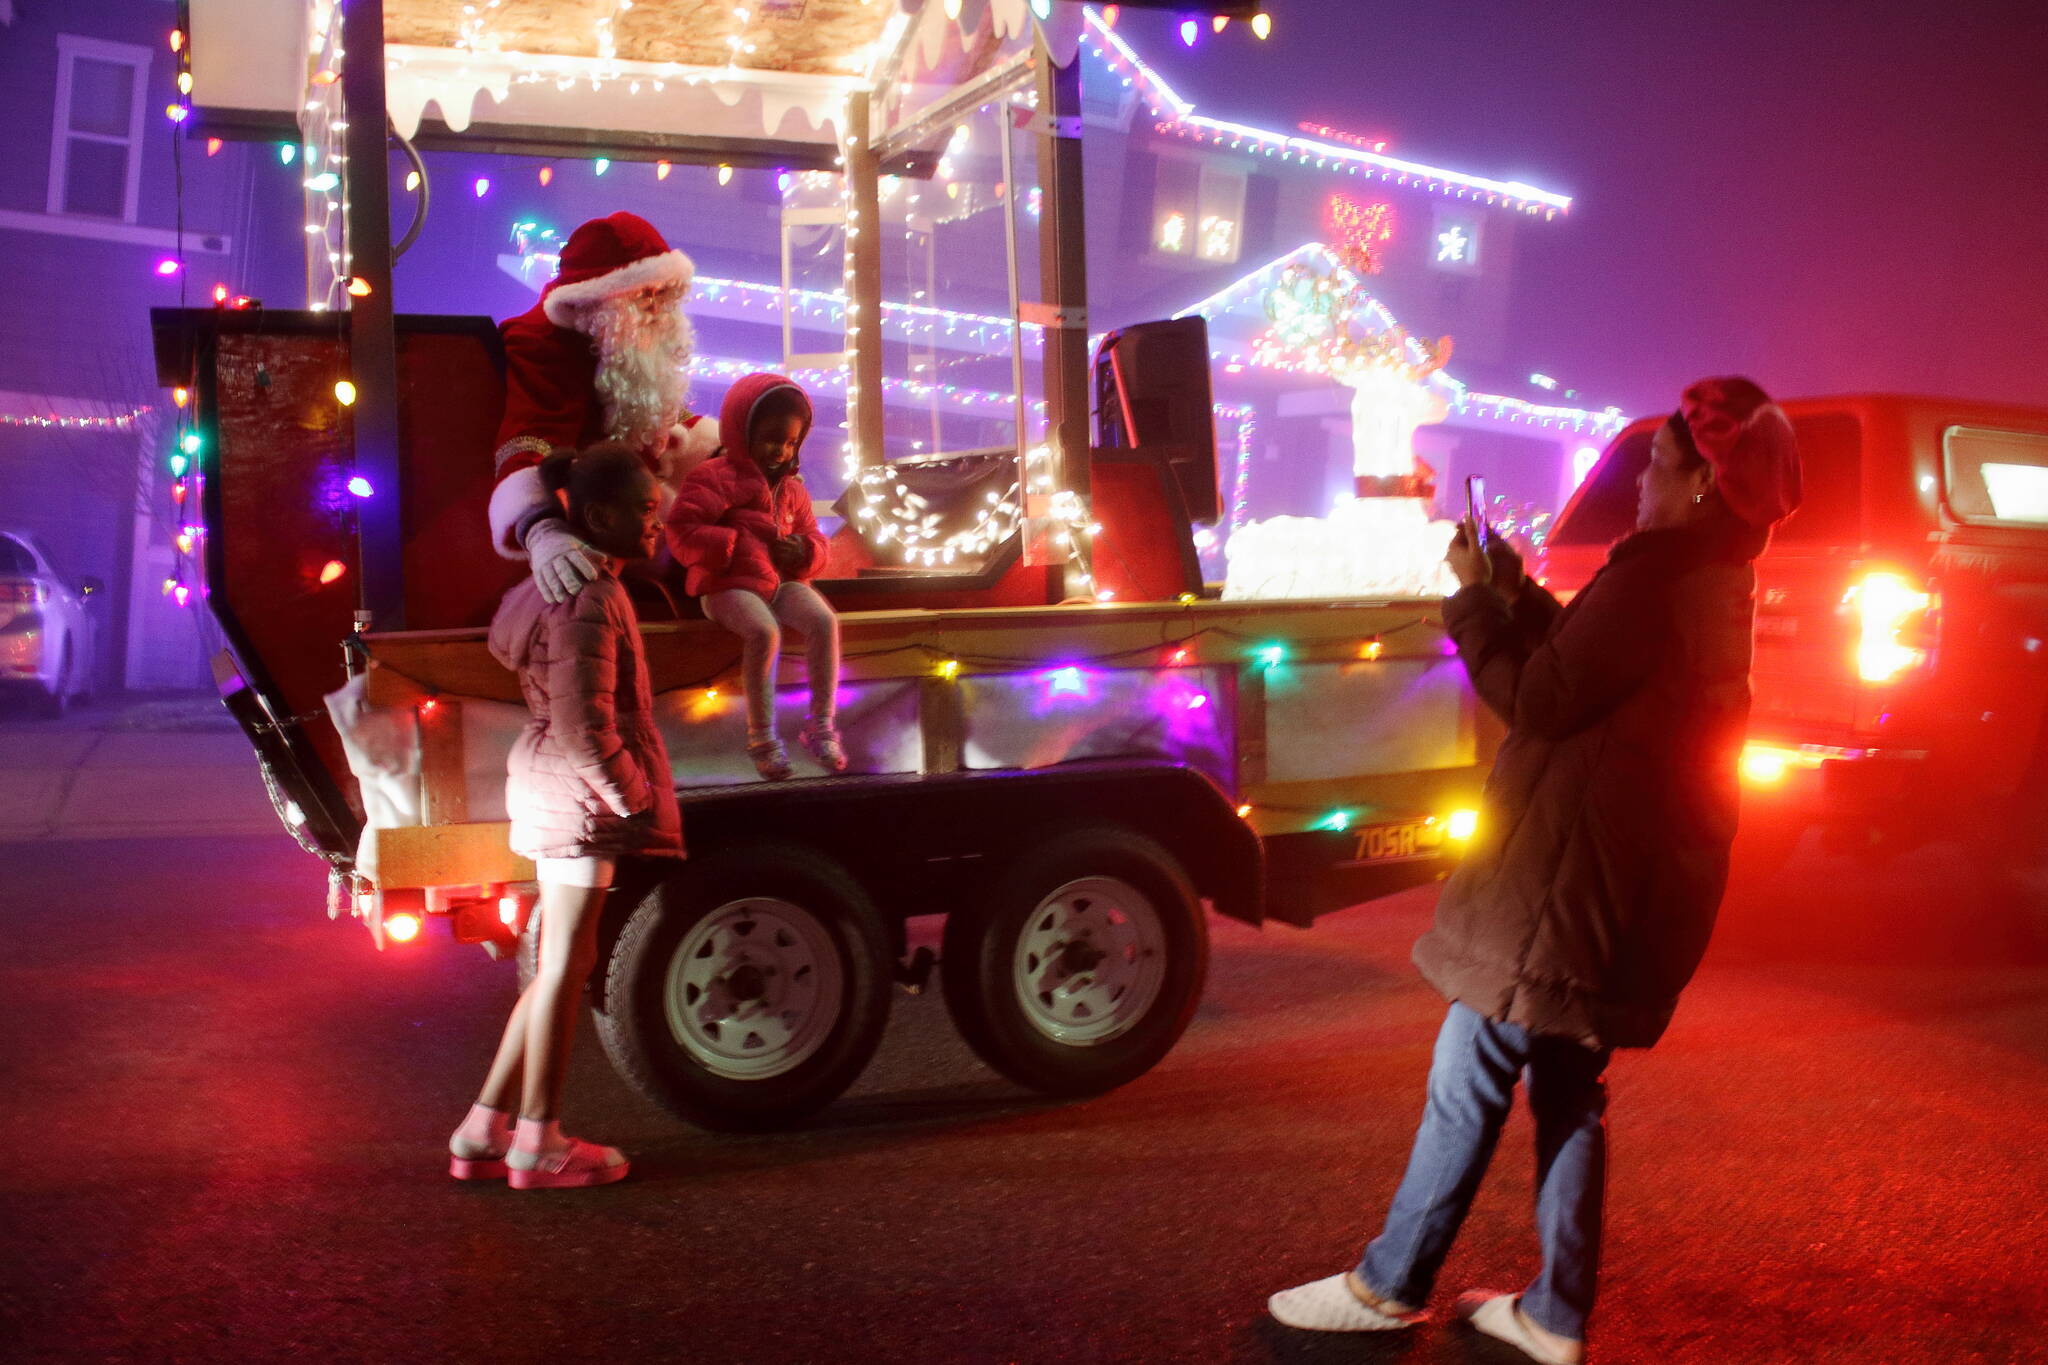 Seeing Santa was a family affair as multiple generations braved the cold and misty night to make holiday memories at the Santa parade. (Photos by Keelin Everly-Lang / The Mirror)